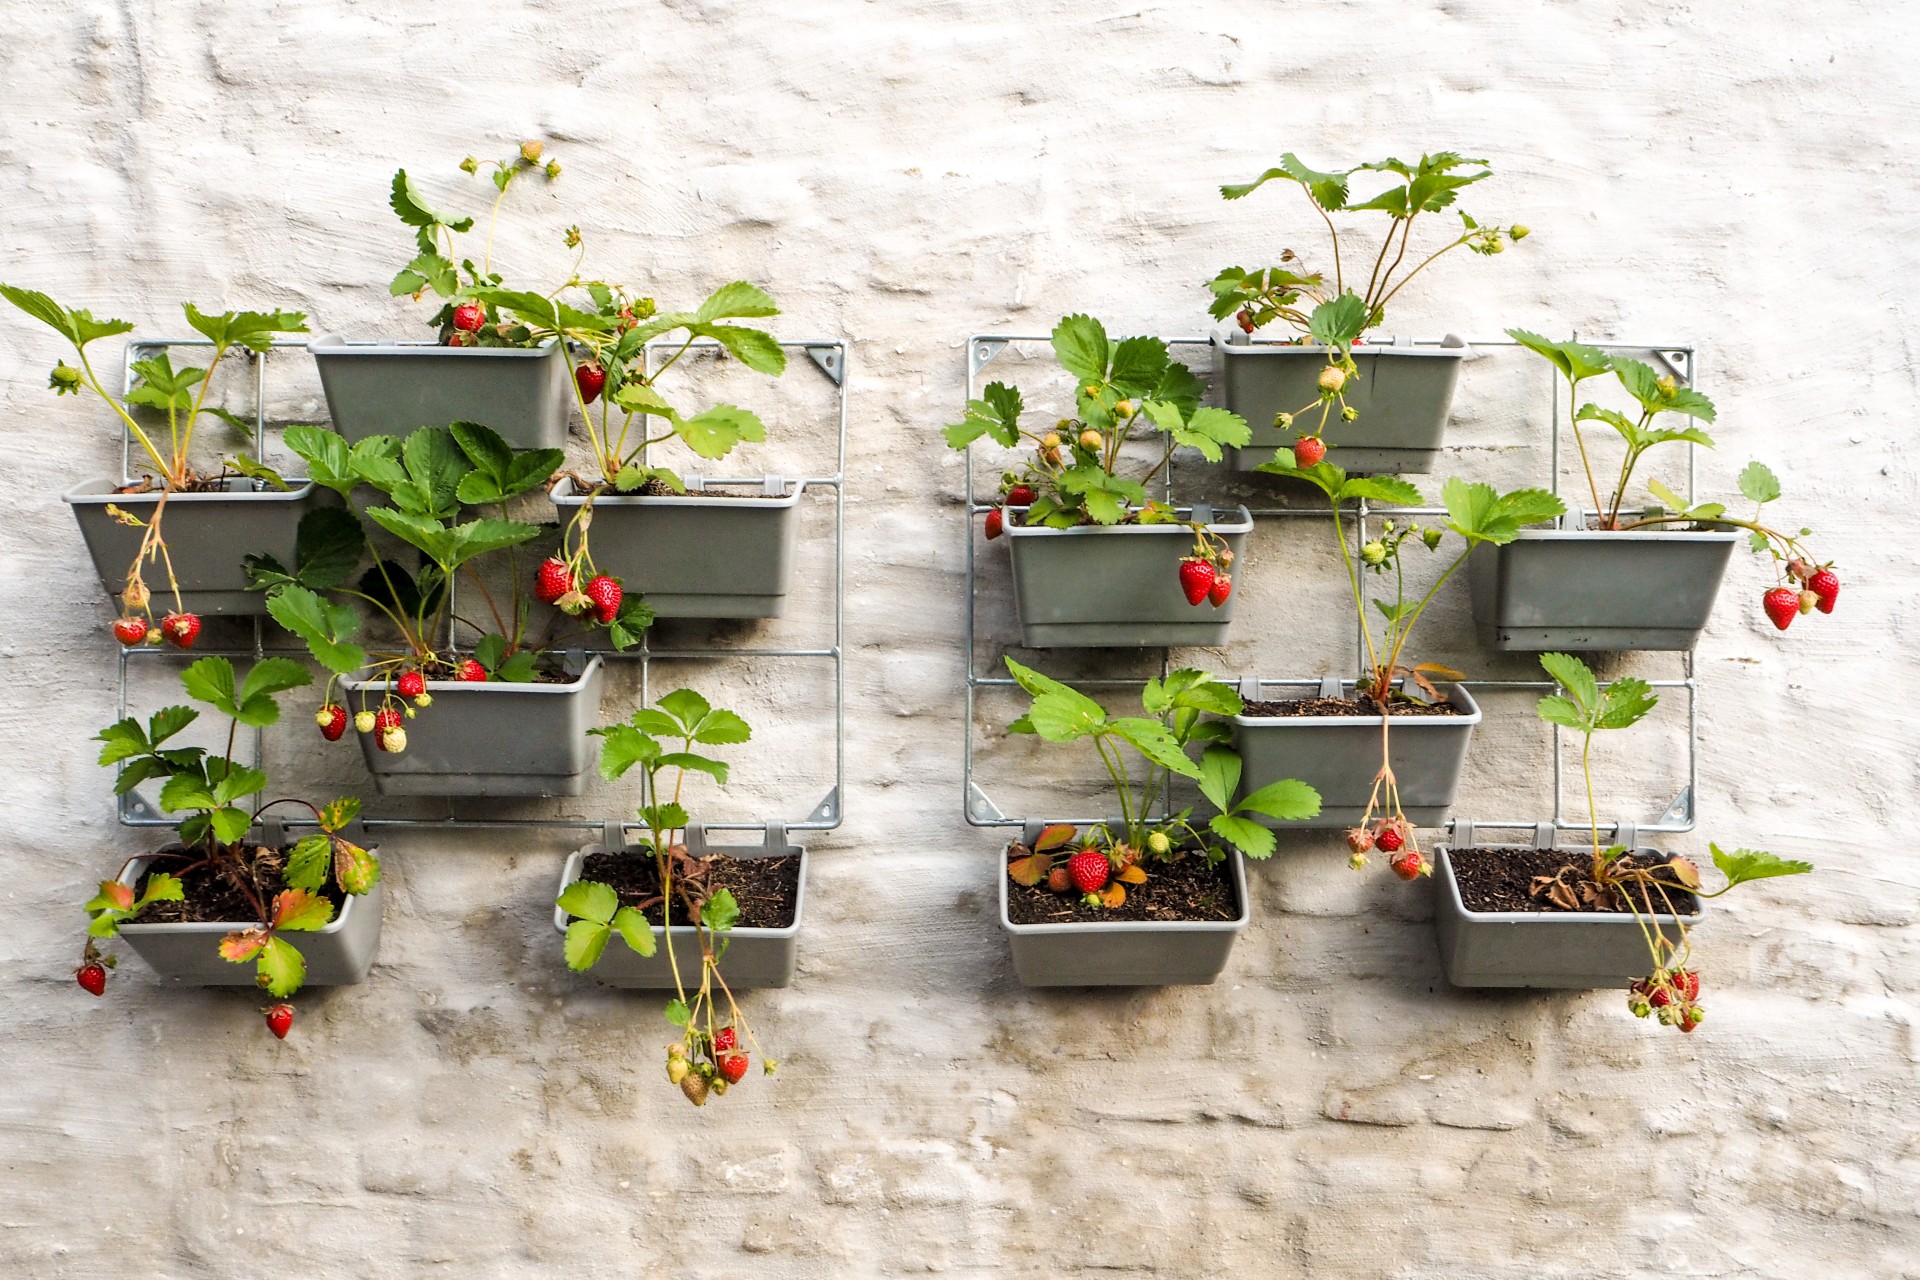 Strawberries being grown vertically on a wall